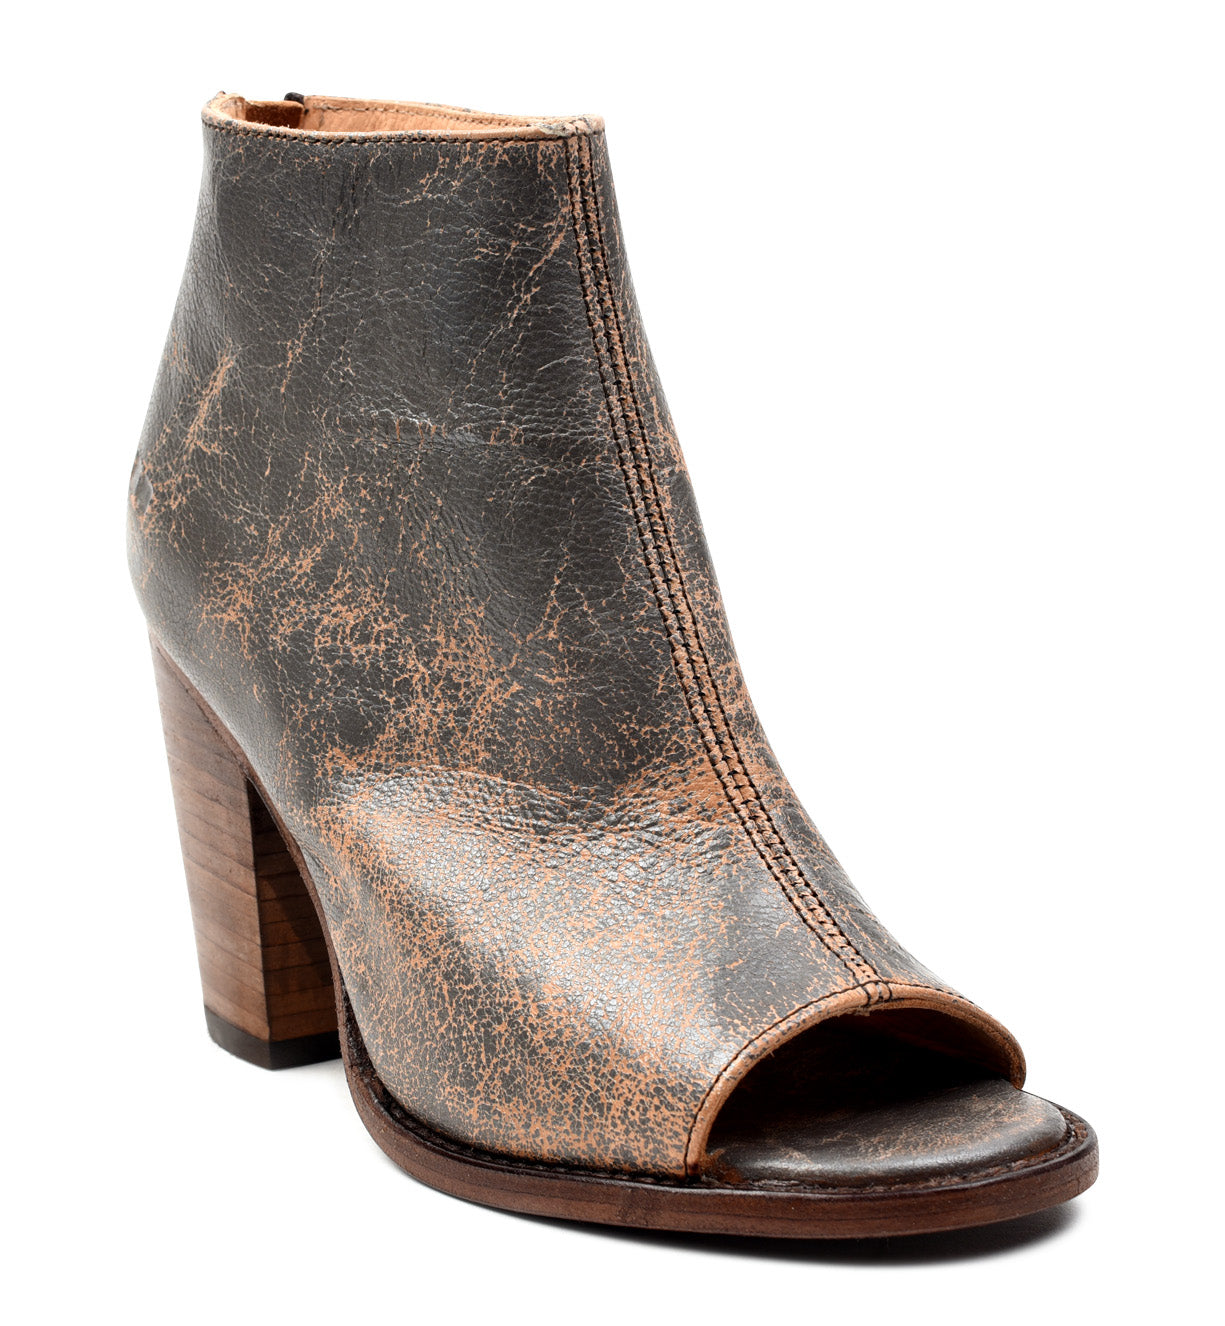 A women's peep toe boot with a wooden heel, the "Onset" by Bed Stu.